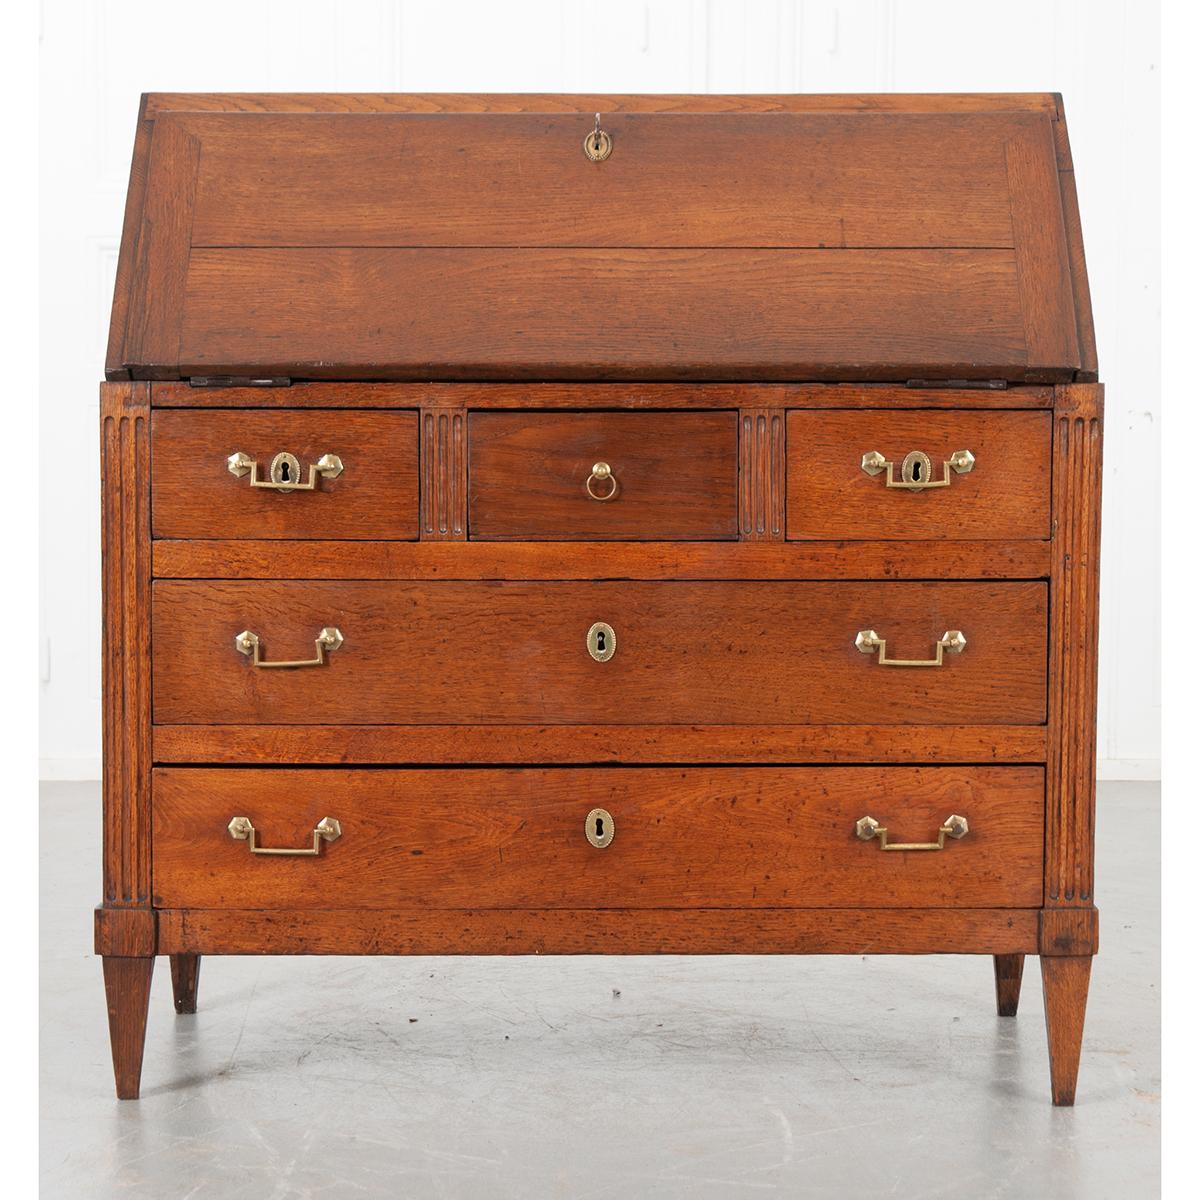 This is a French 19th century Louis XVI-style desk made of oak. It has a slanted front that folds down to make a writing surface and reveals six small drawers with wood pulls and open storage areas. In the center compartment, the surface lifts to